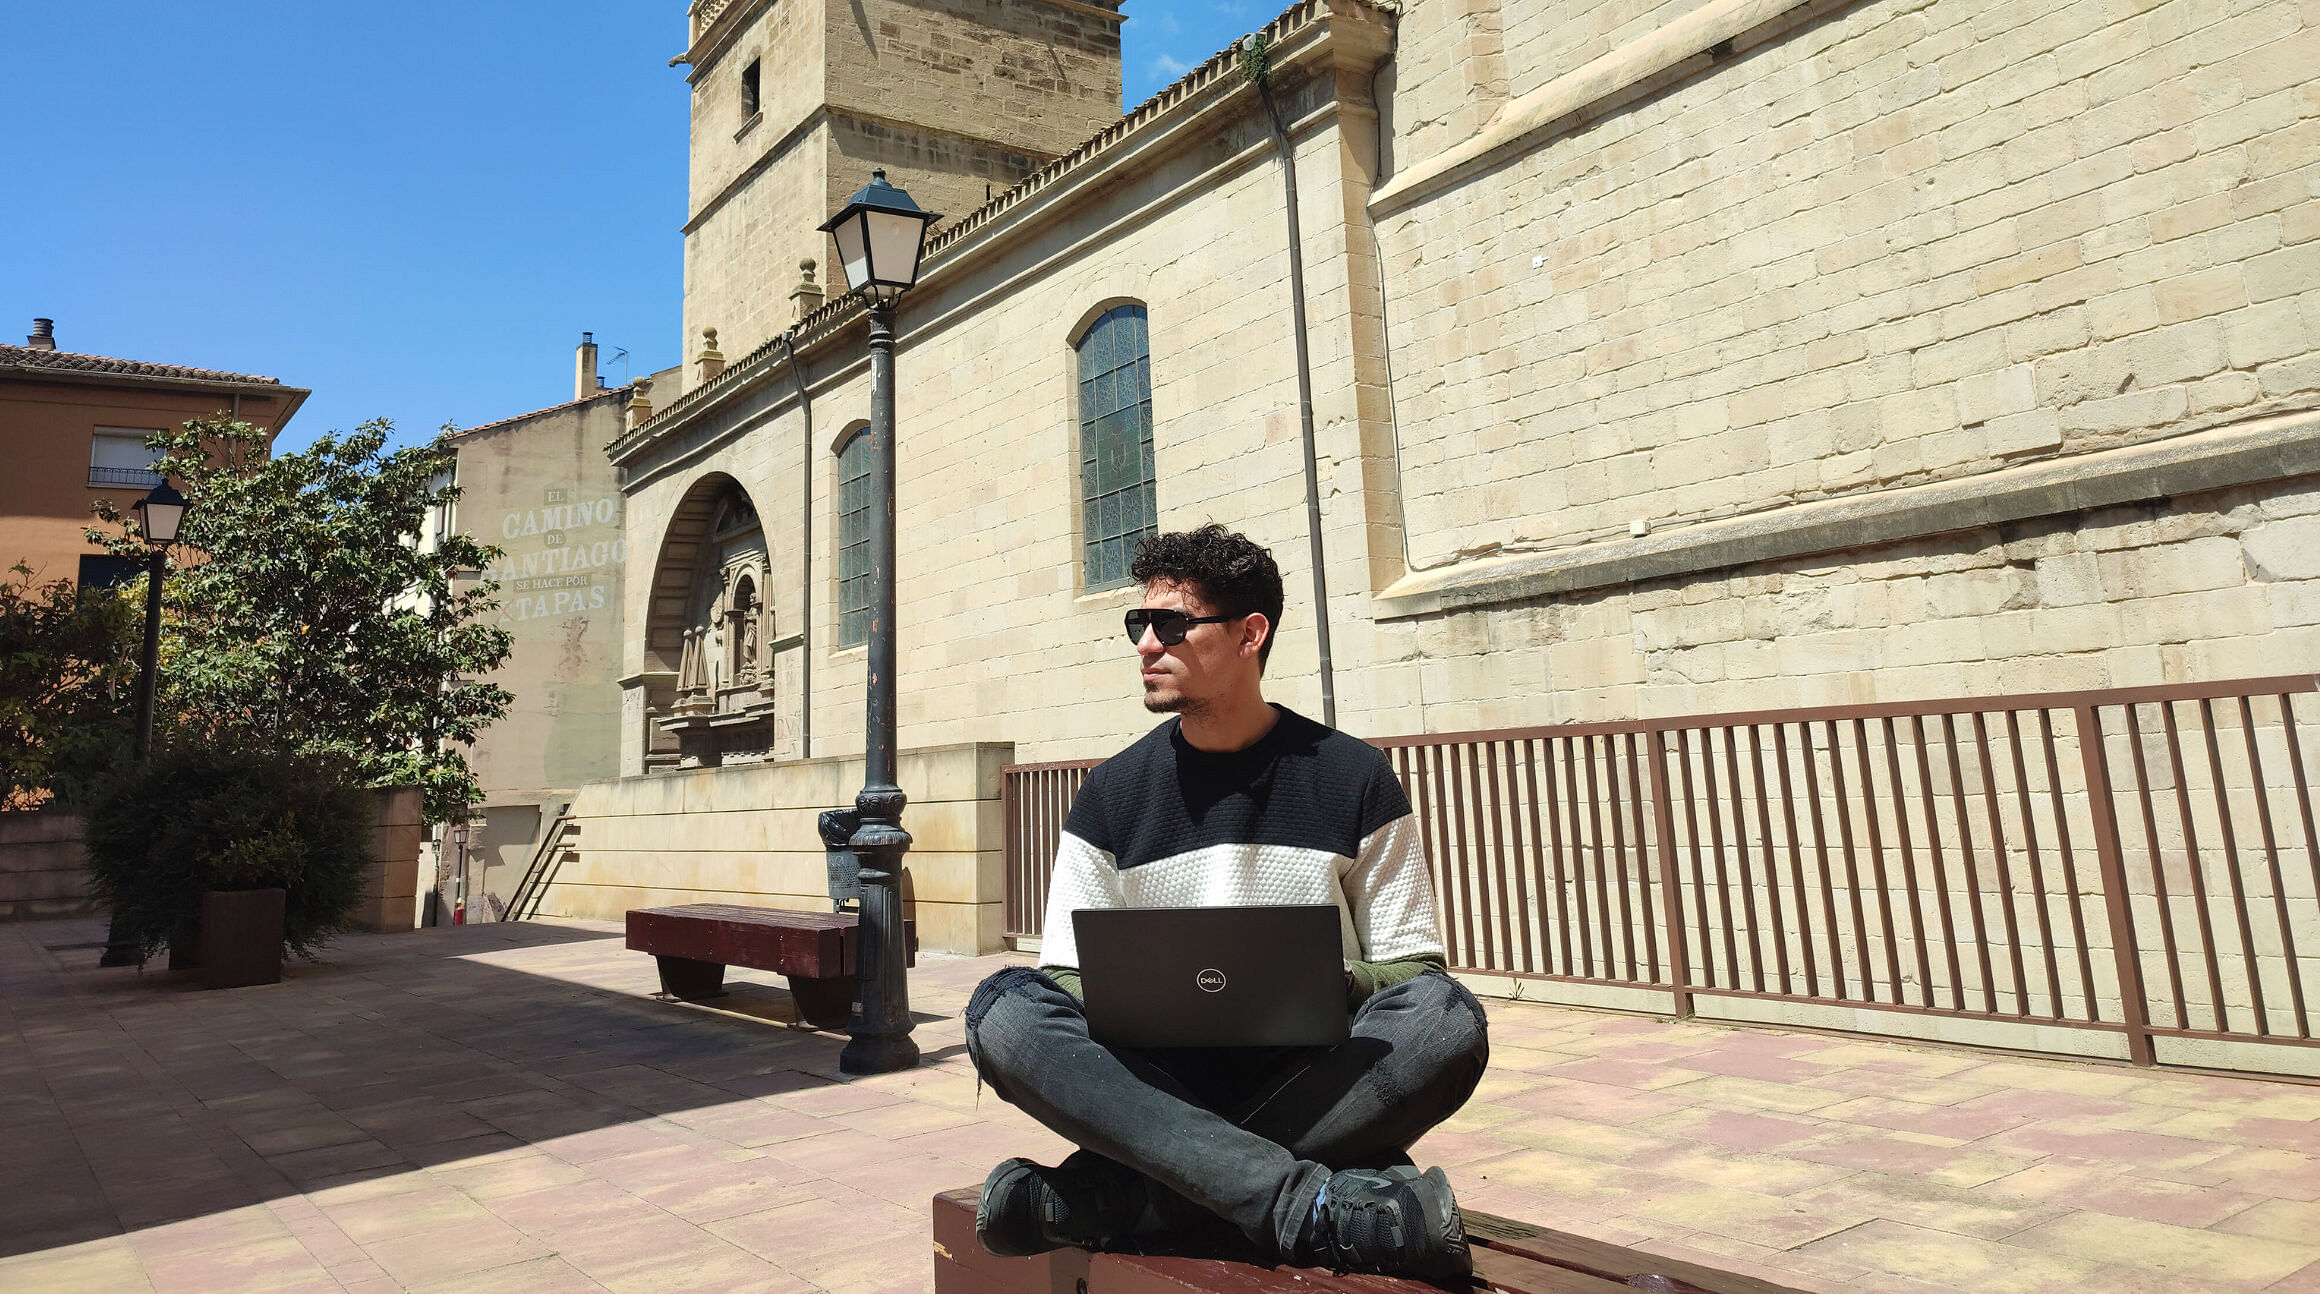 digital nomad working from a plaza in spain